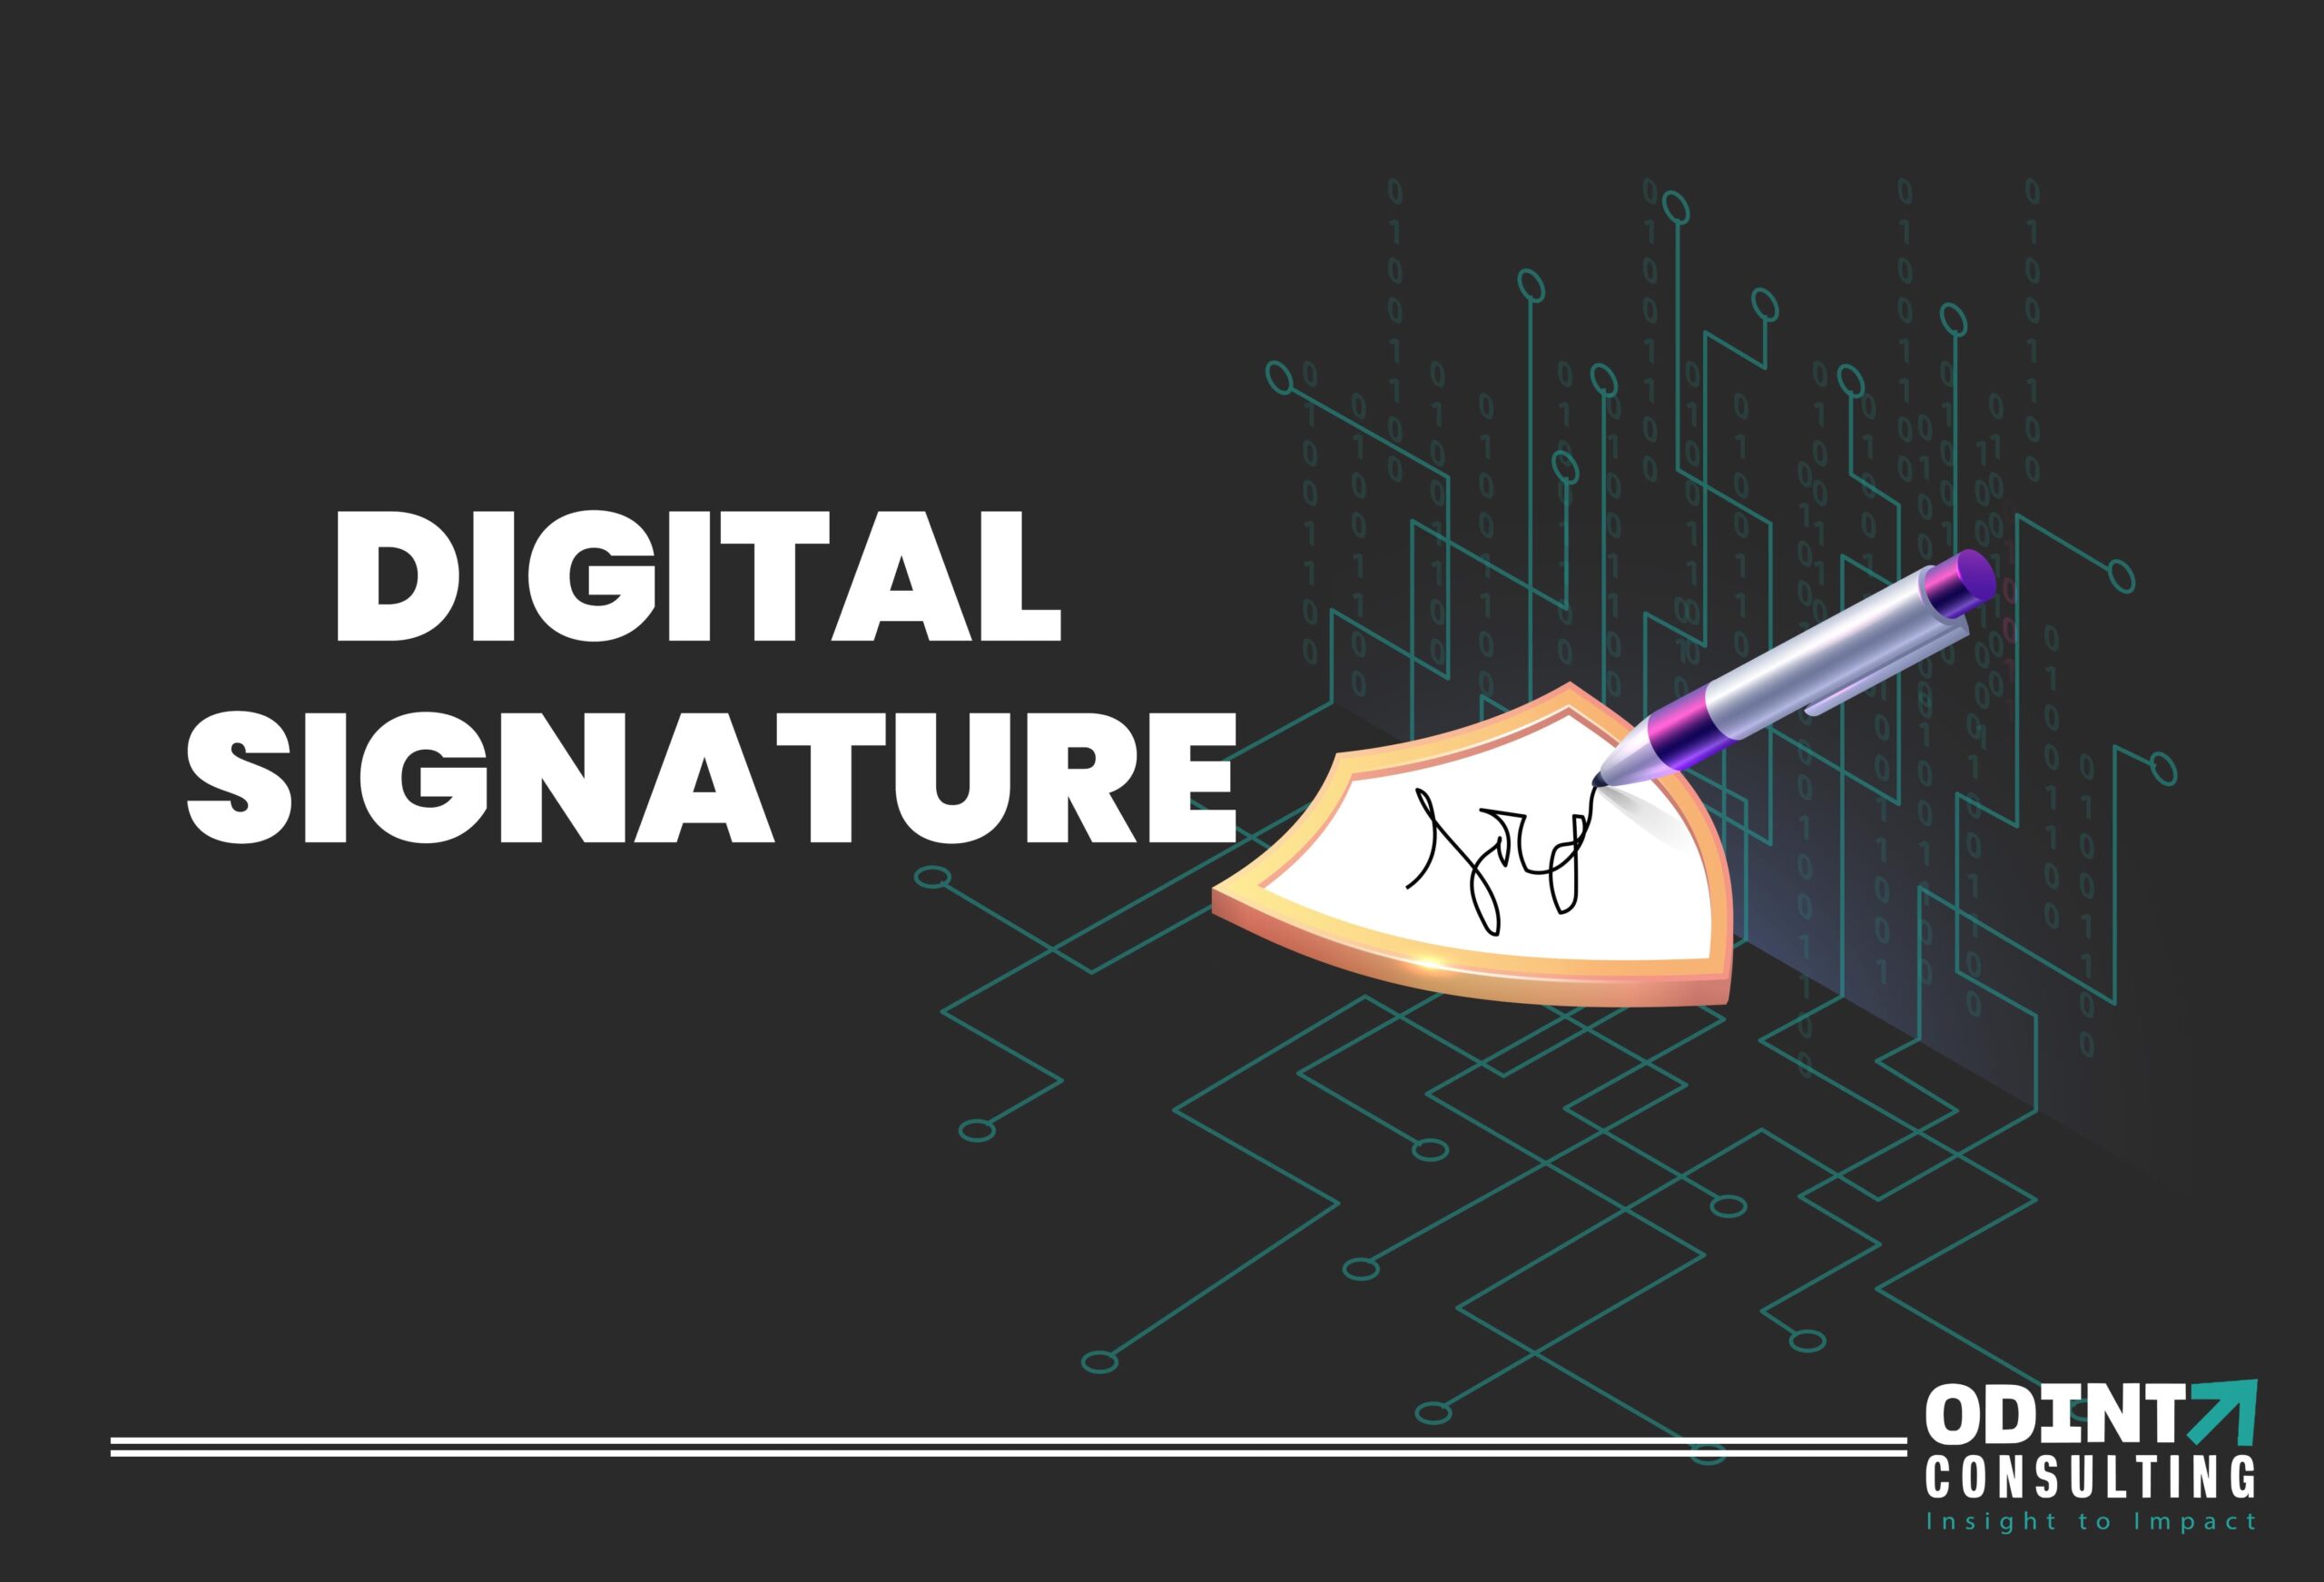 Digital Signature – Definition, Working & Steps To Acquire